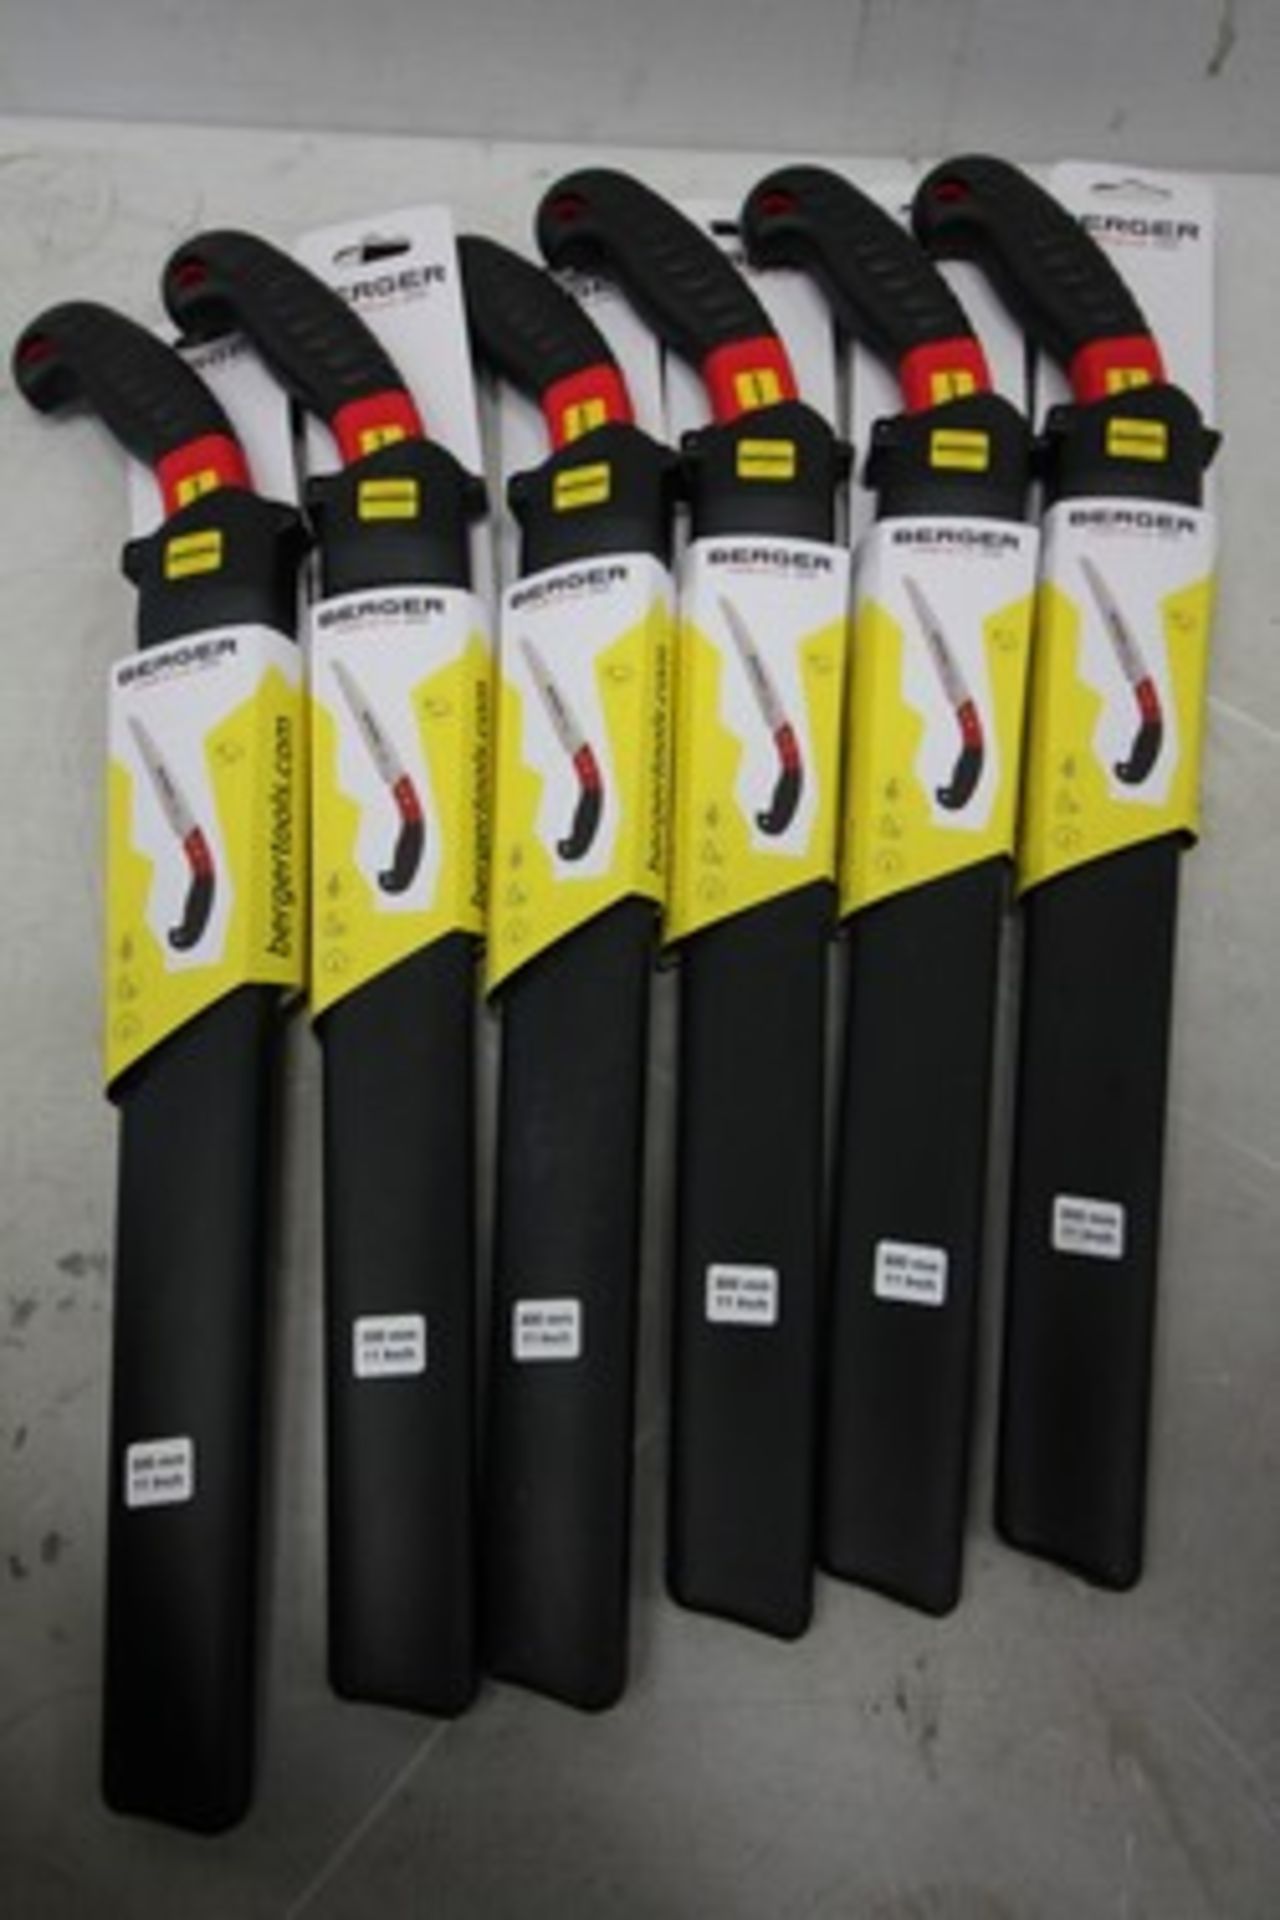 6 x Berger pole saws, code 64750 - New (GS18)